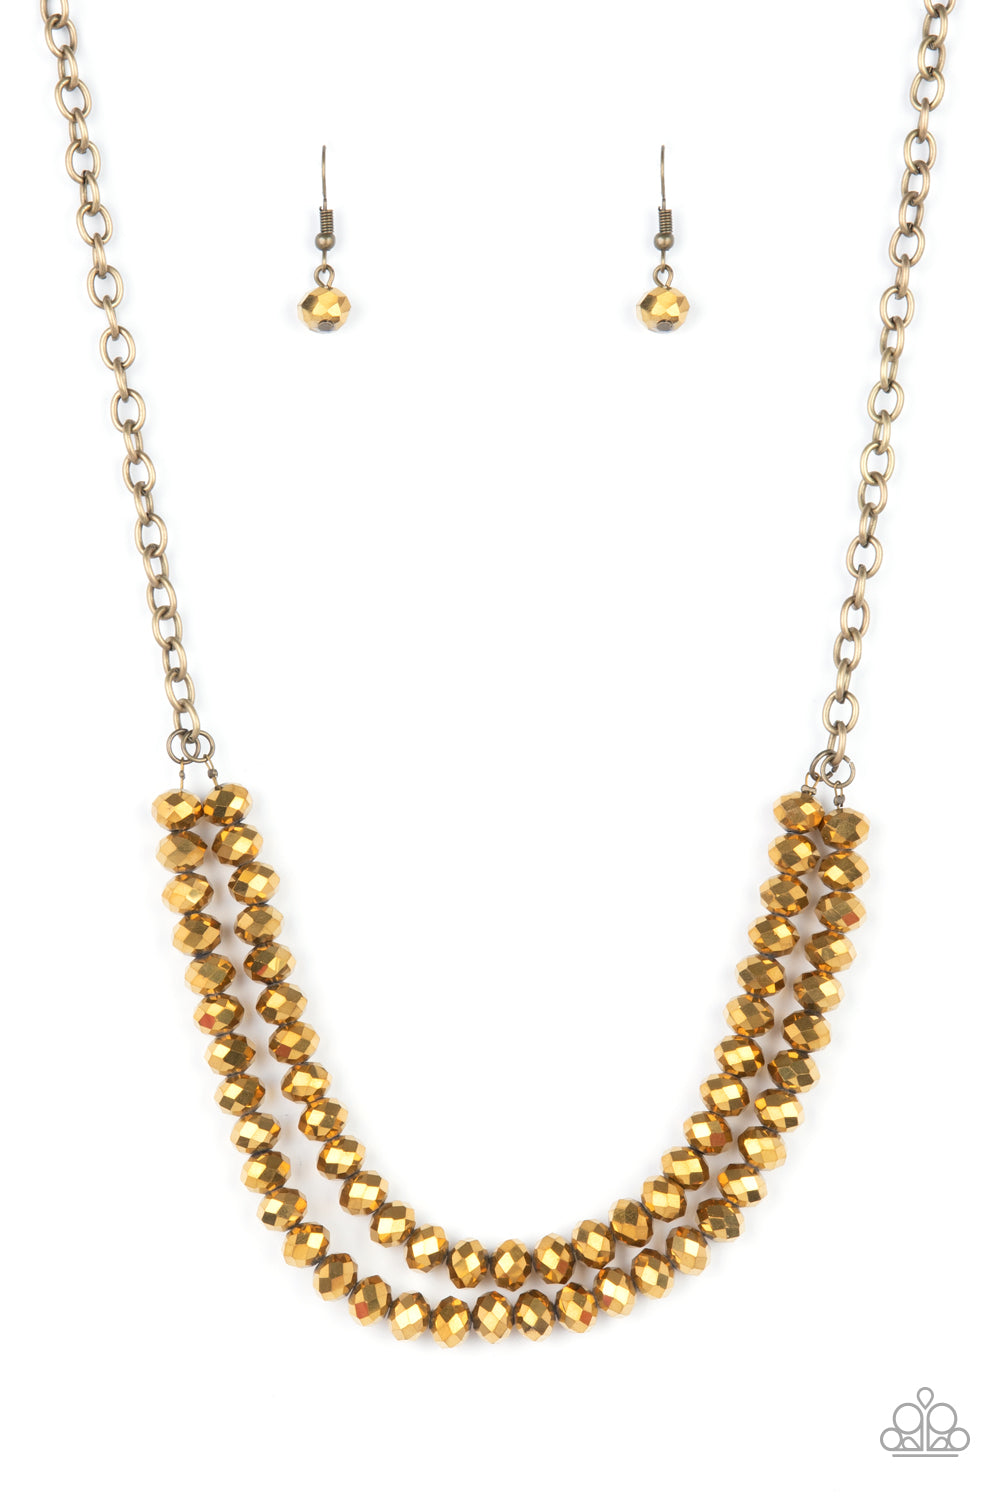 five-dollar-jewelry-may-the-fierce-be-with-you-brass-necklace-paparazzi-accessories